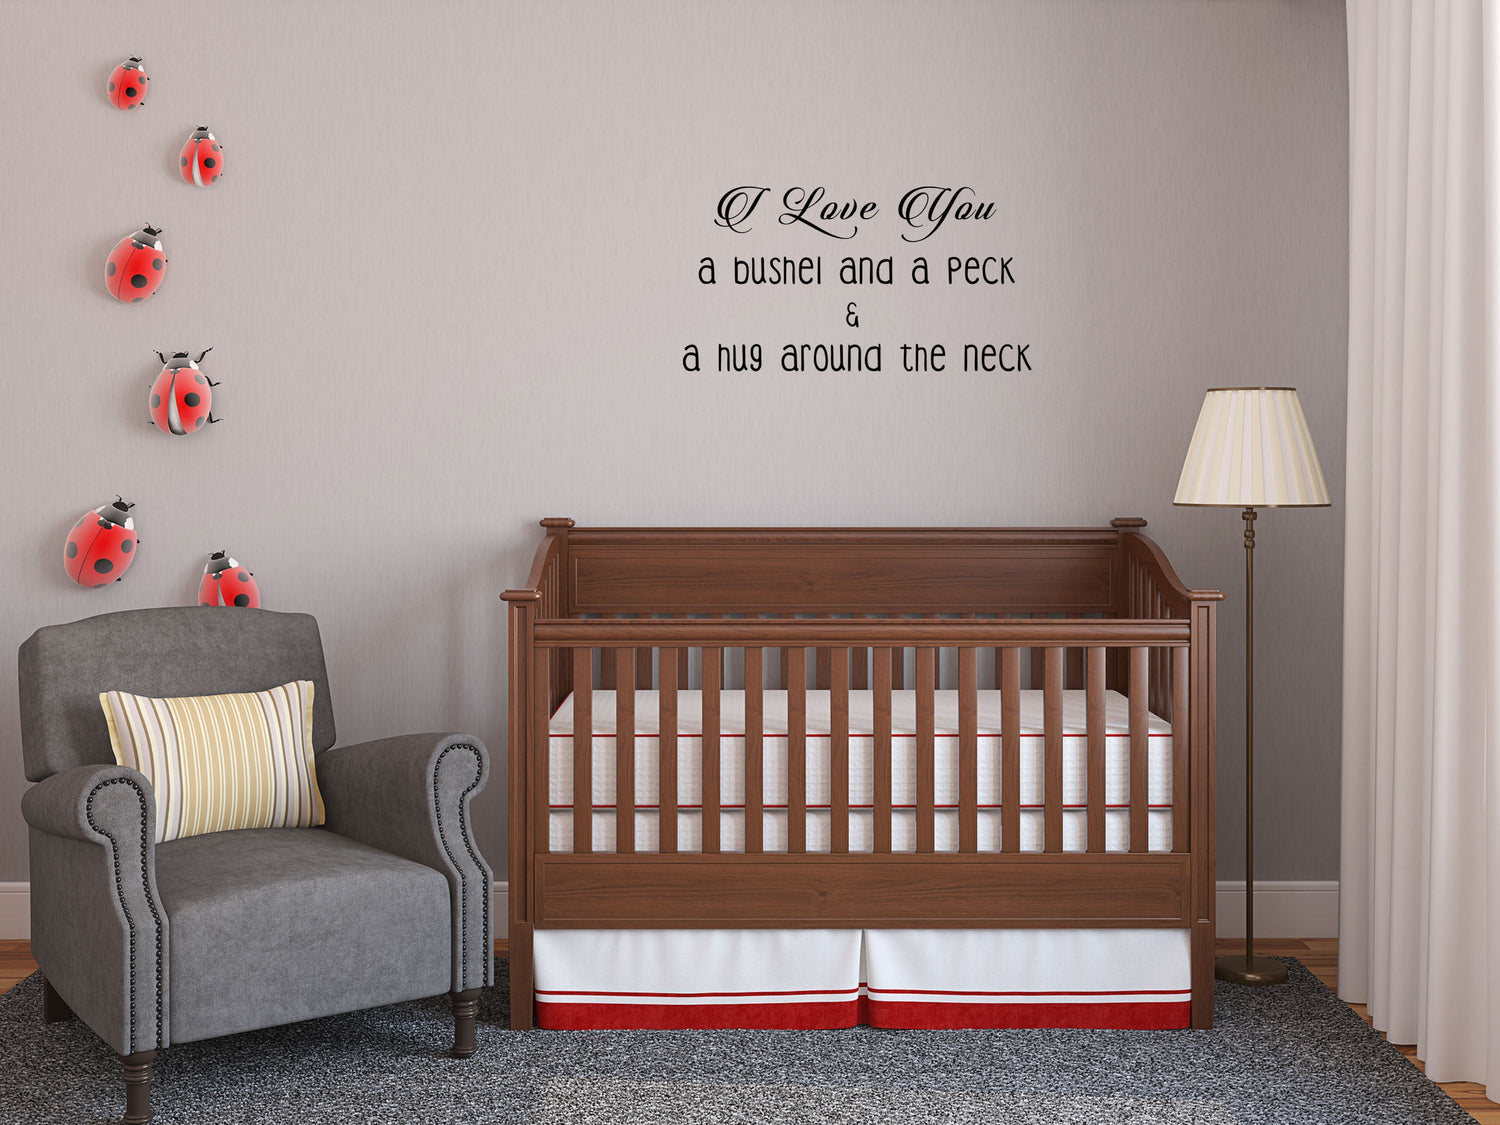 I Love You A Bushel And A Peck Vinyl Wall Decal Inspirational Wall Signs 